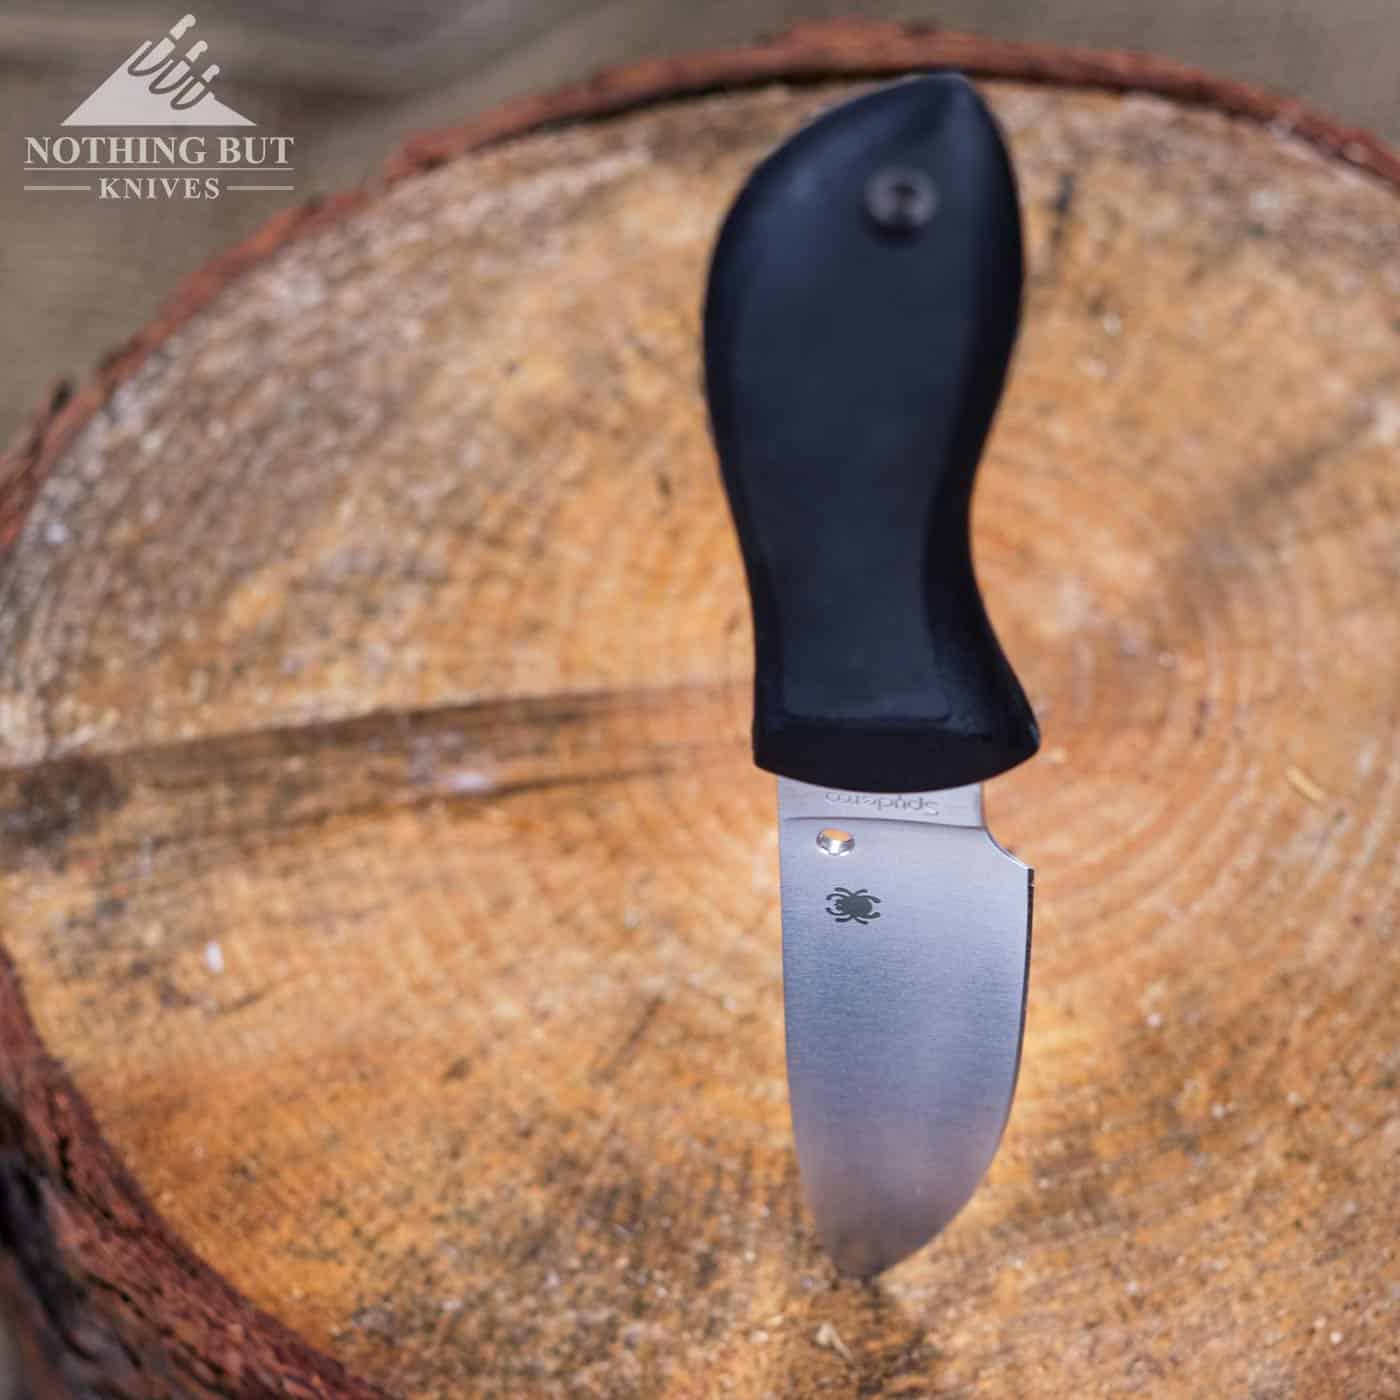 The Spyderco Bill Moran Drop Point Fixed Blade Knife sticking out of a tree stump.